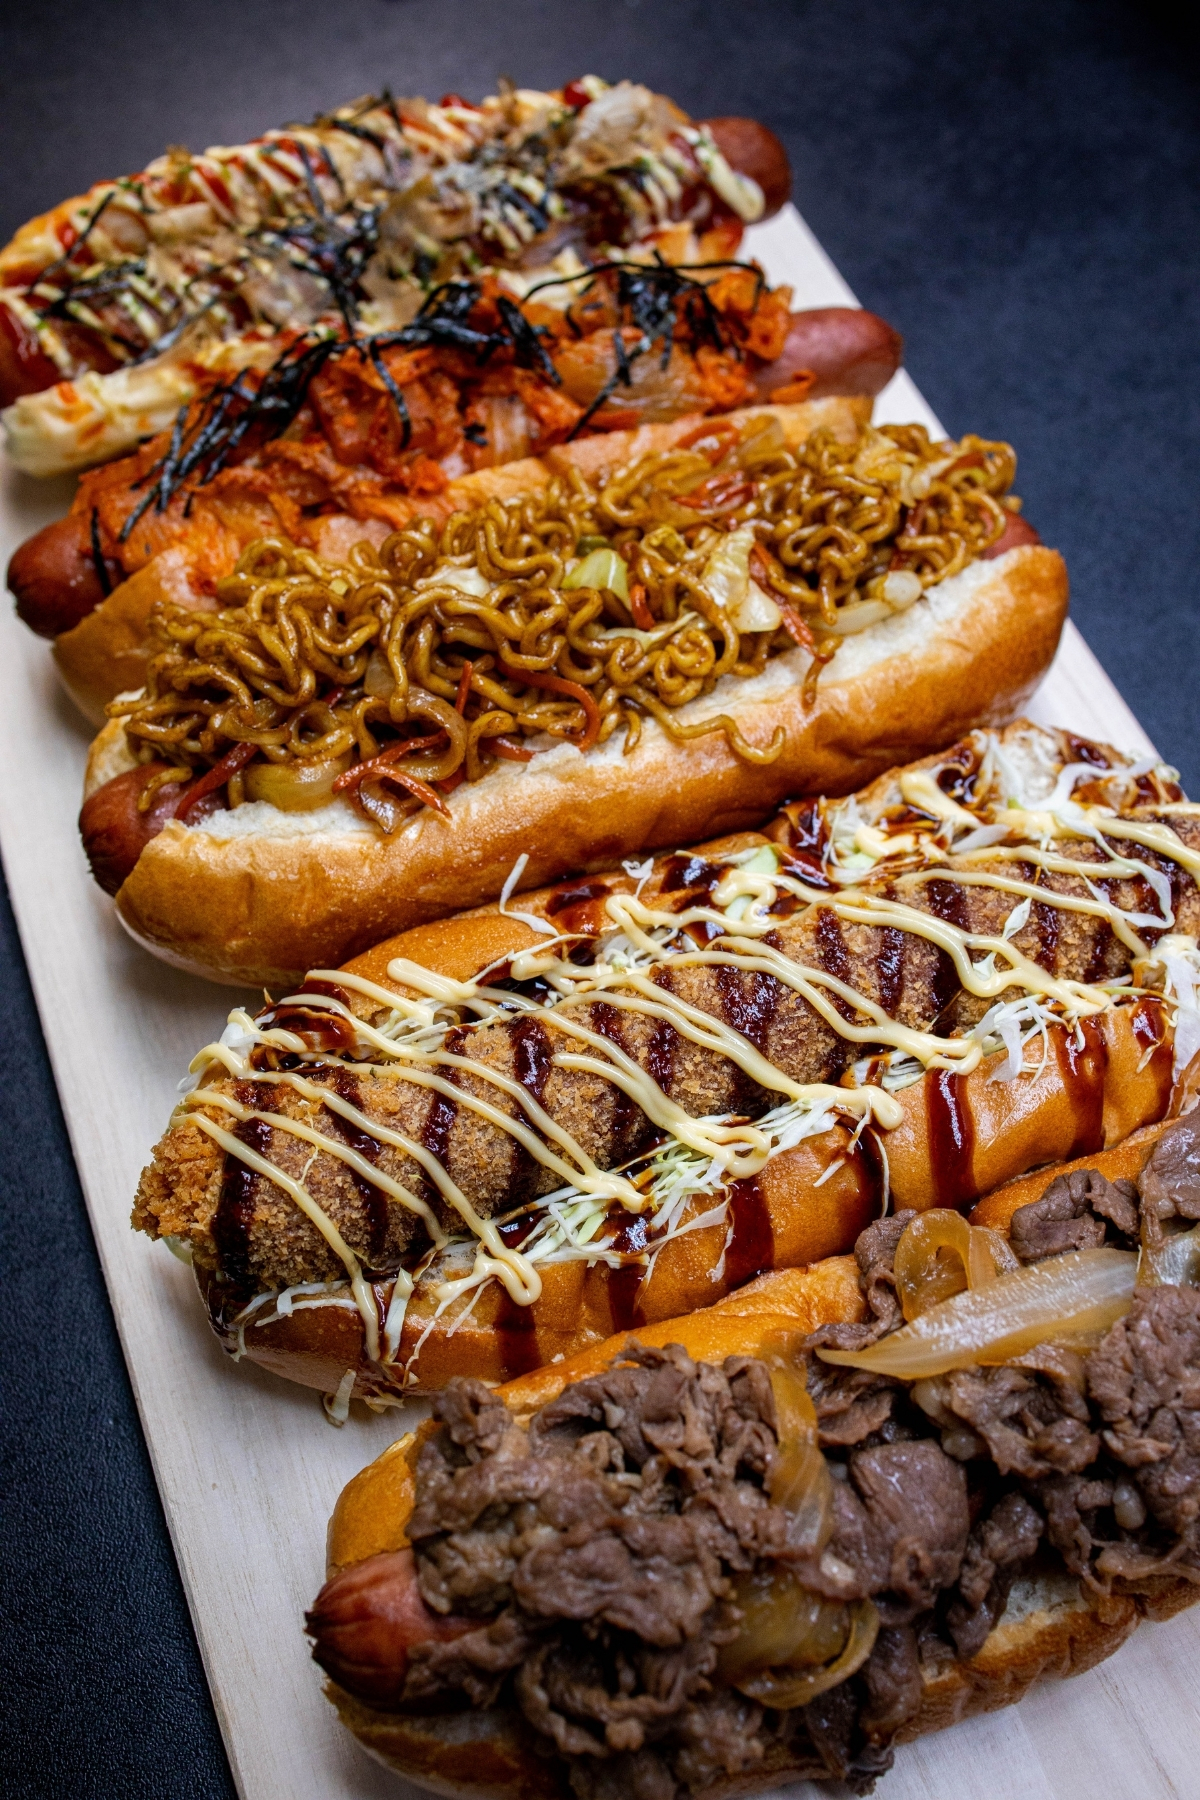 A row of Japanese-style hot dogs all spruced with a whole manner of toppings from fried tofu to yakisoba.